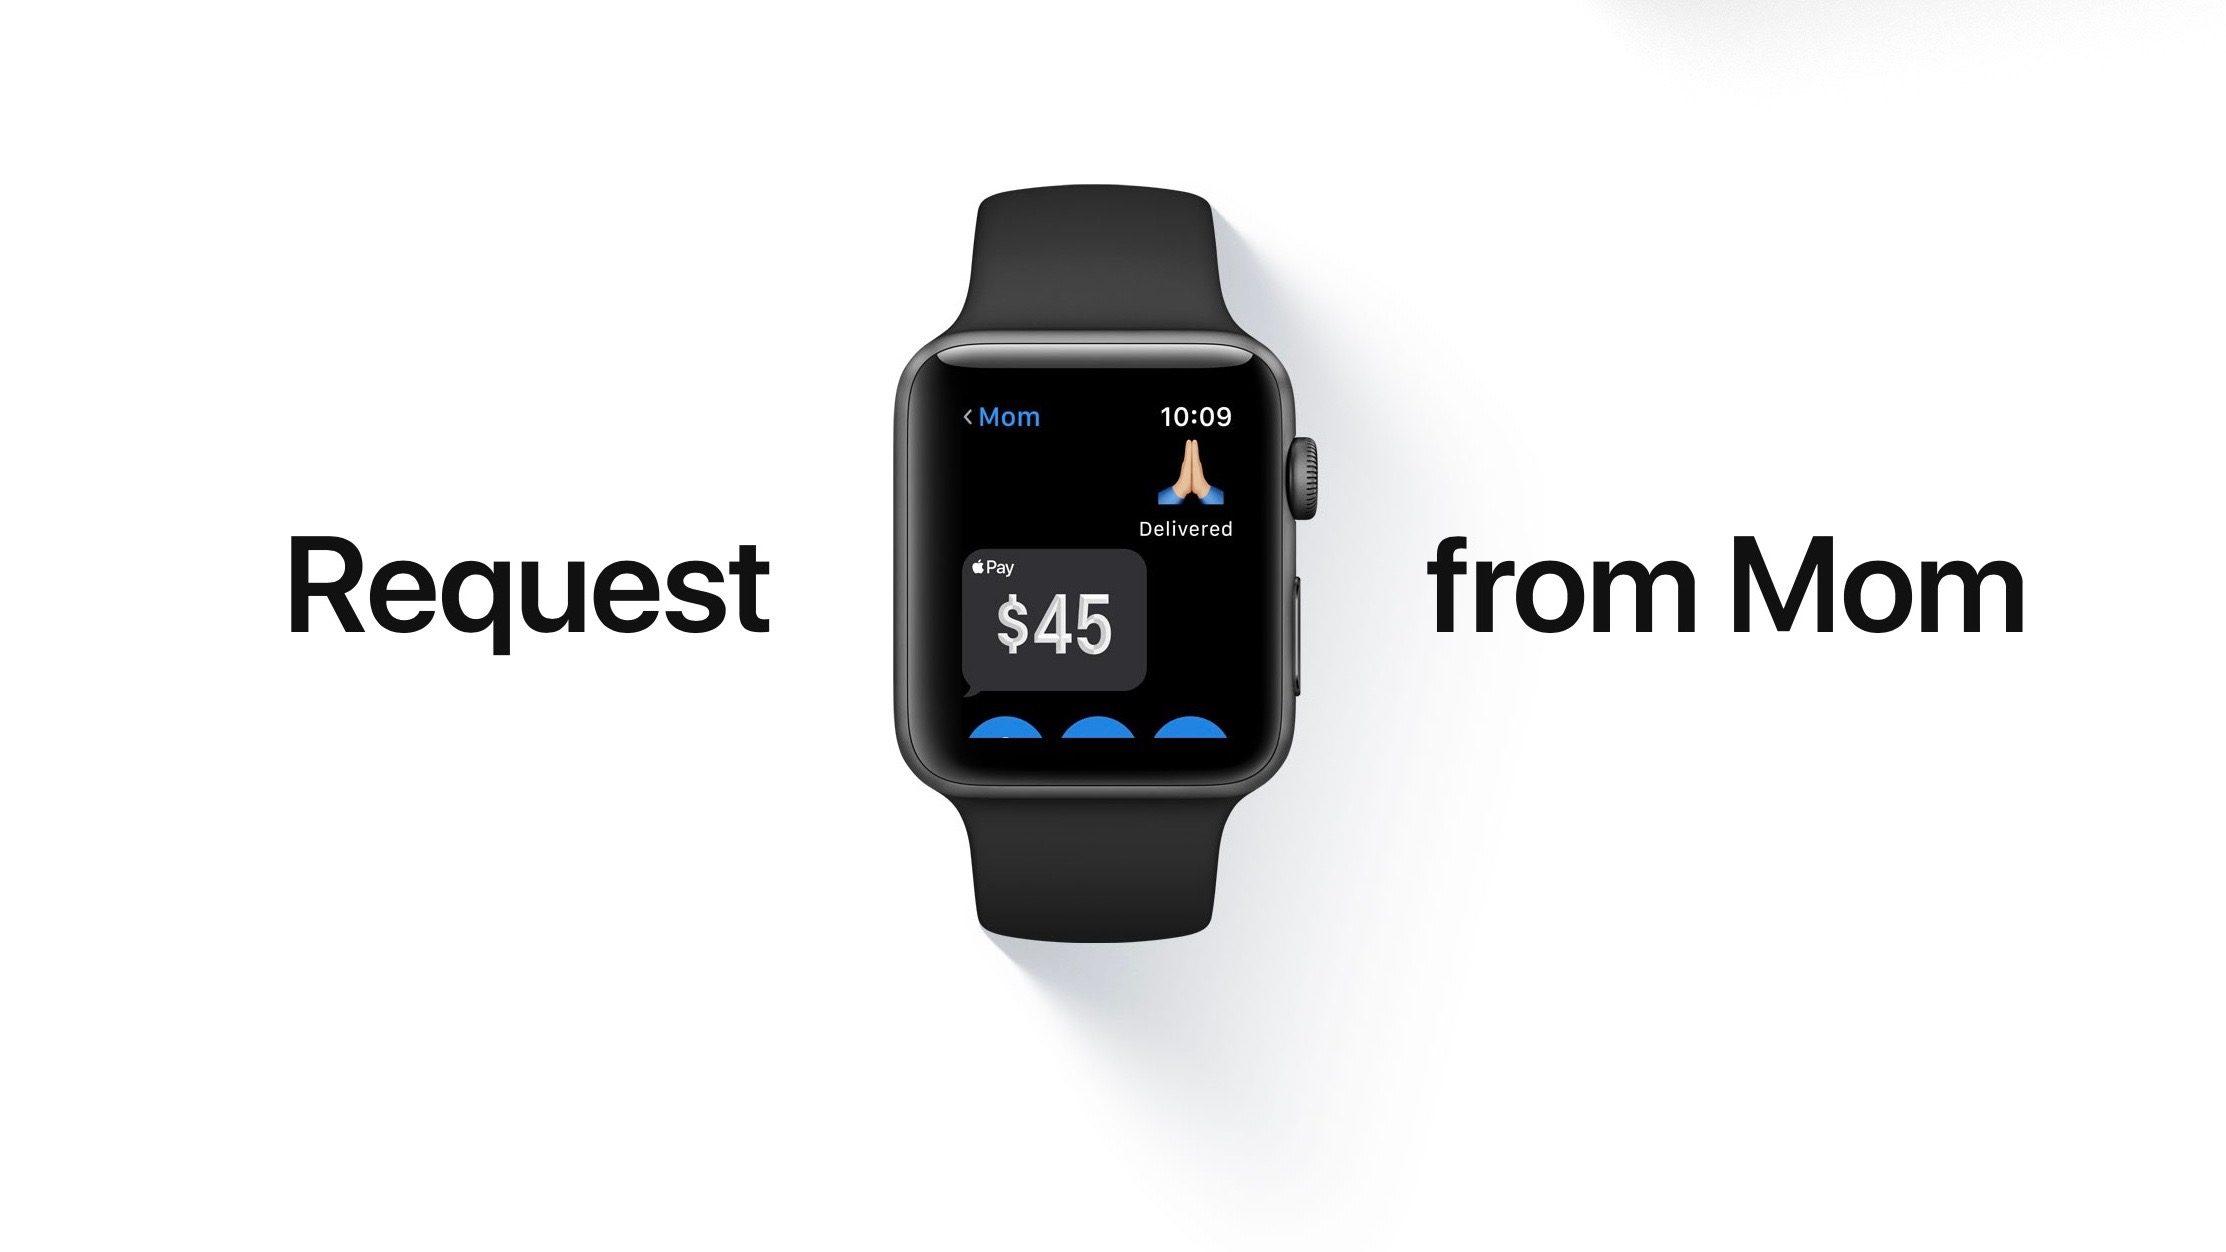 WatchOS 4.2 for Apple Watch Now Available with Apple Pay Cash Support